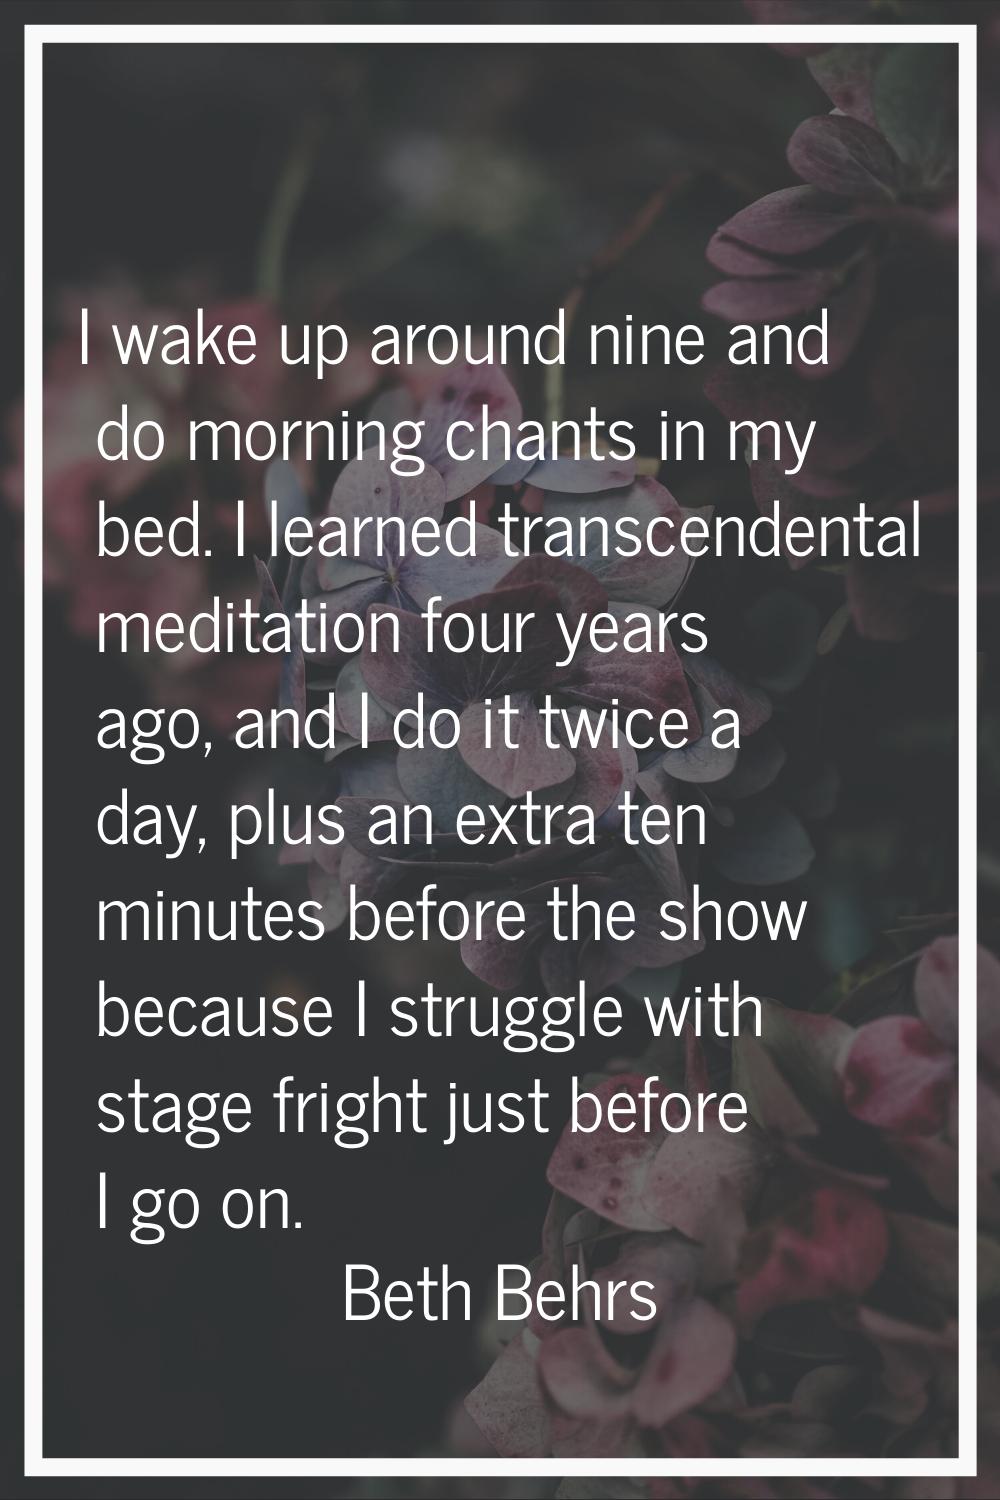 I wake up around nine and do morning chants in my bed. I learned transcendental meditation four yea